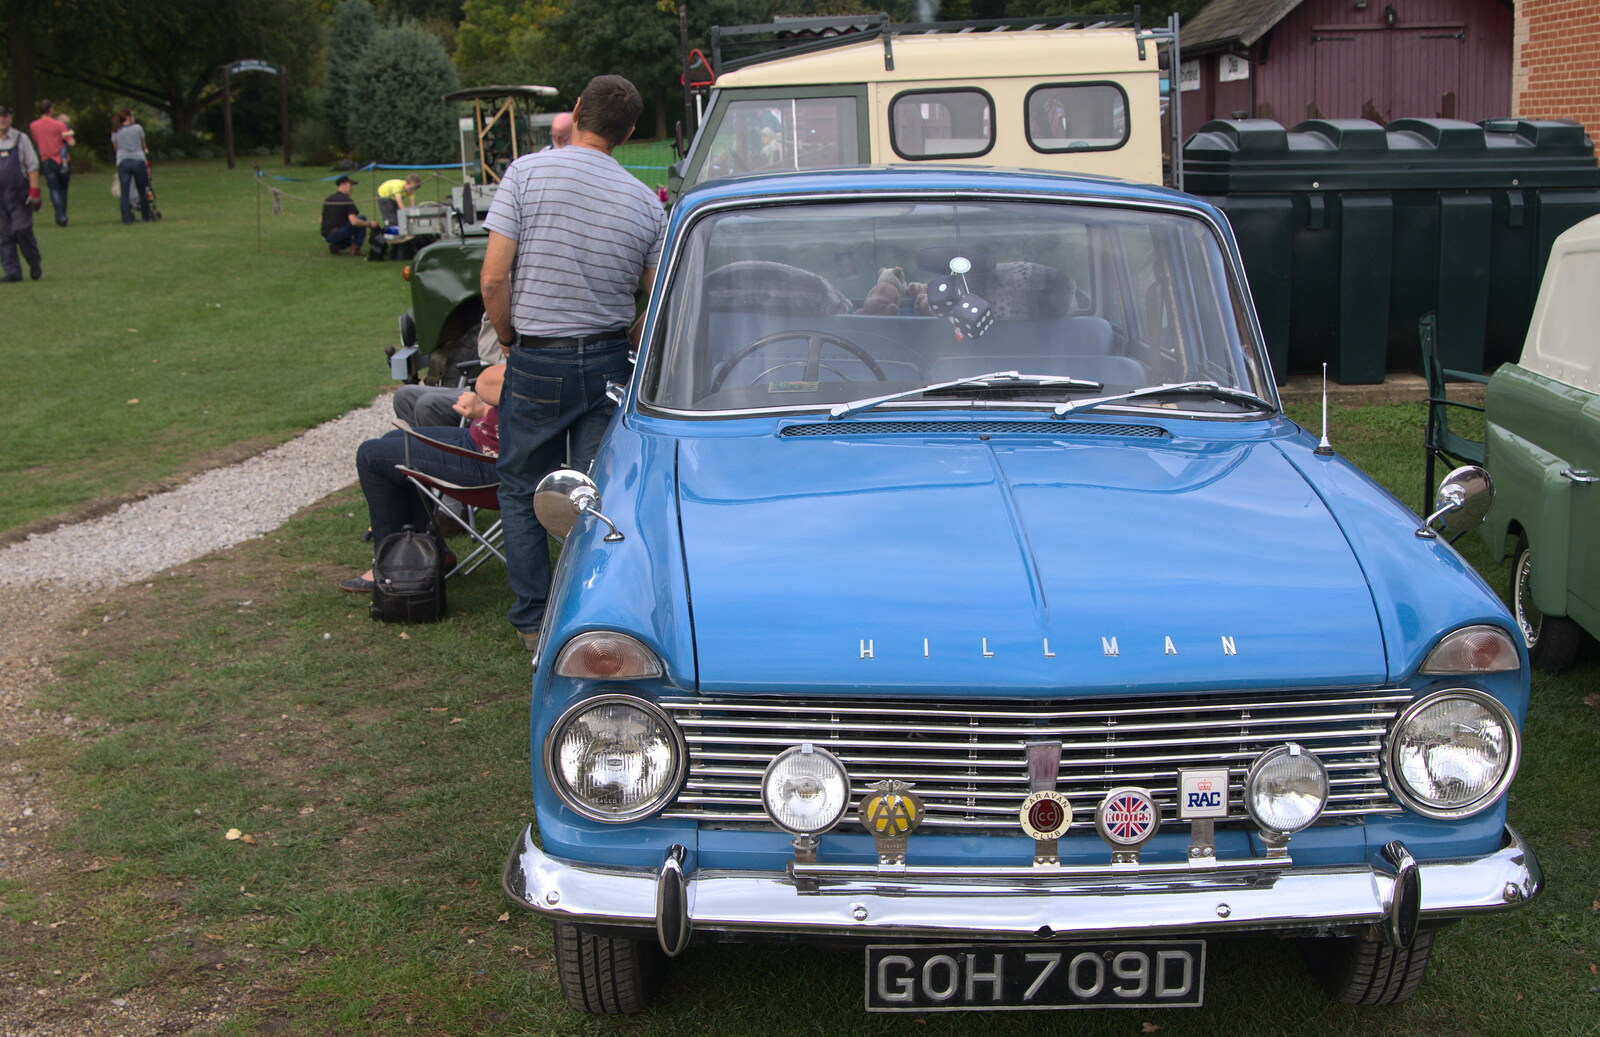 A nice old Hillman from A Trip to Bressingham Steam Museum, Bressingham, Norfolk - 28th September 2014